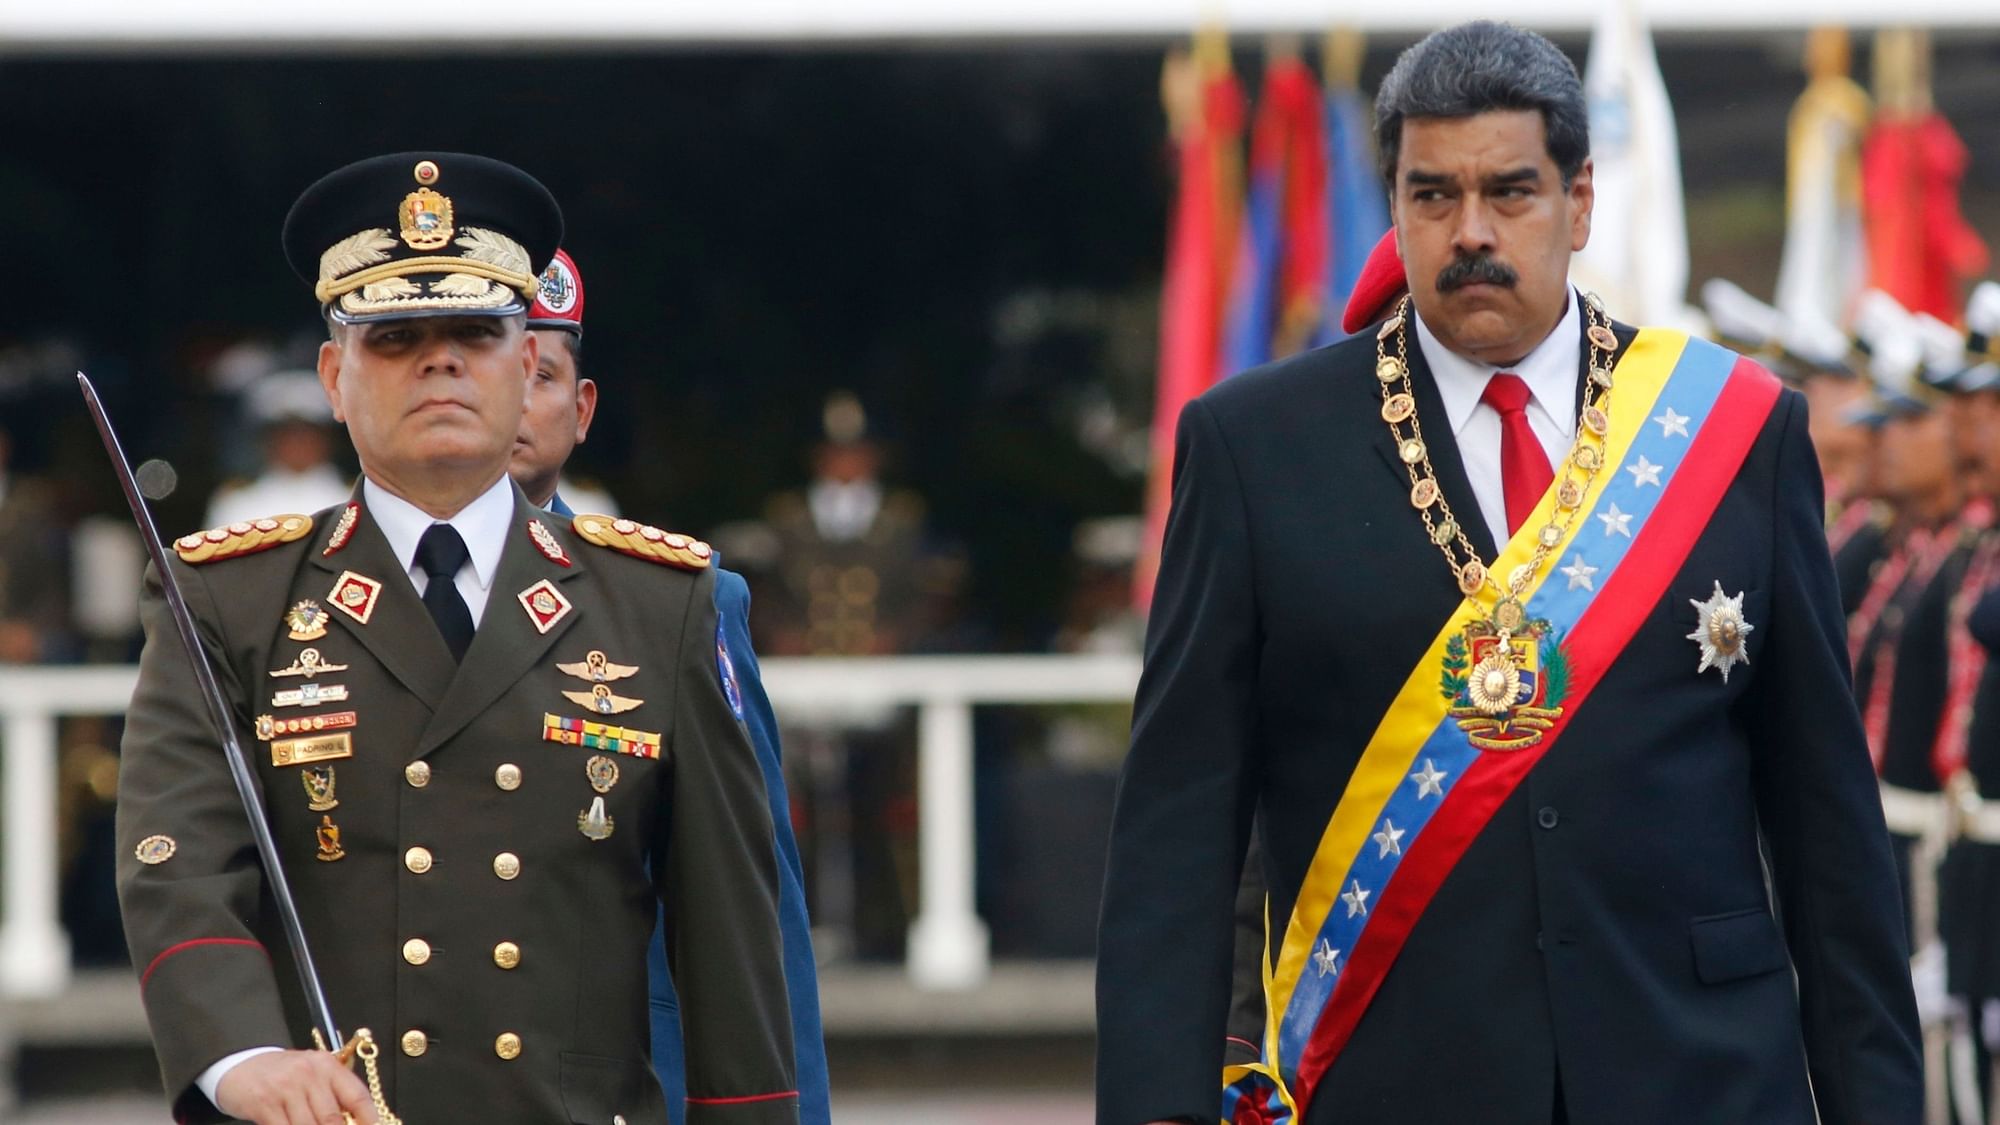 In this 24 May 2018 file photo, Venezuela’s President Nicolas Maduro, right, walks with his Defence Minister Vladimir Padrino Lopez as they review the troops during a military parade at Fort Tiuna in Caracas, Venezuela.